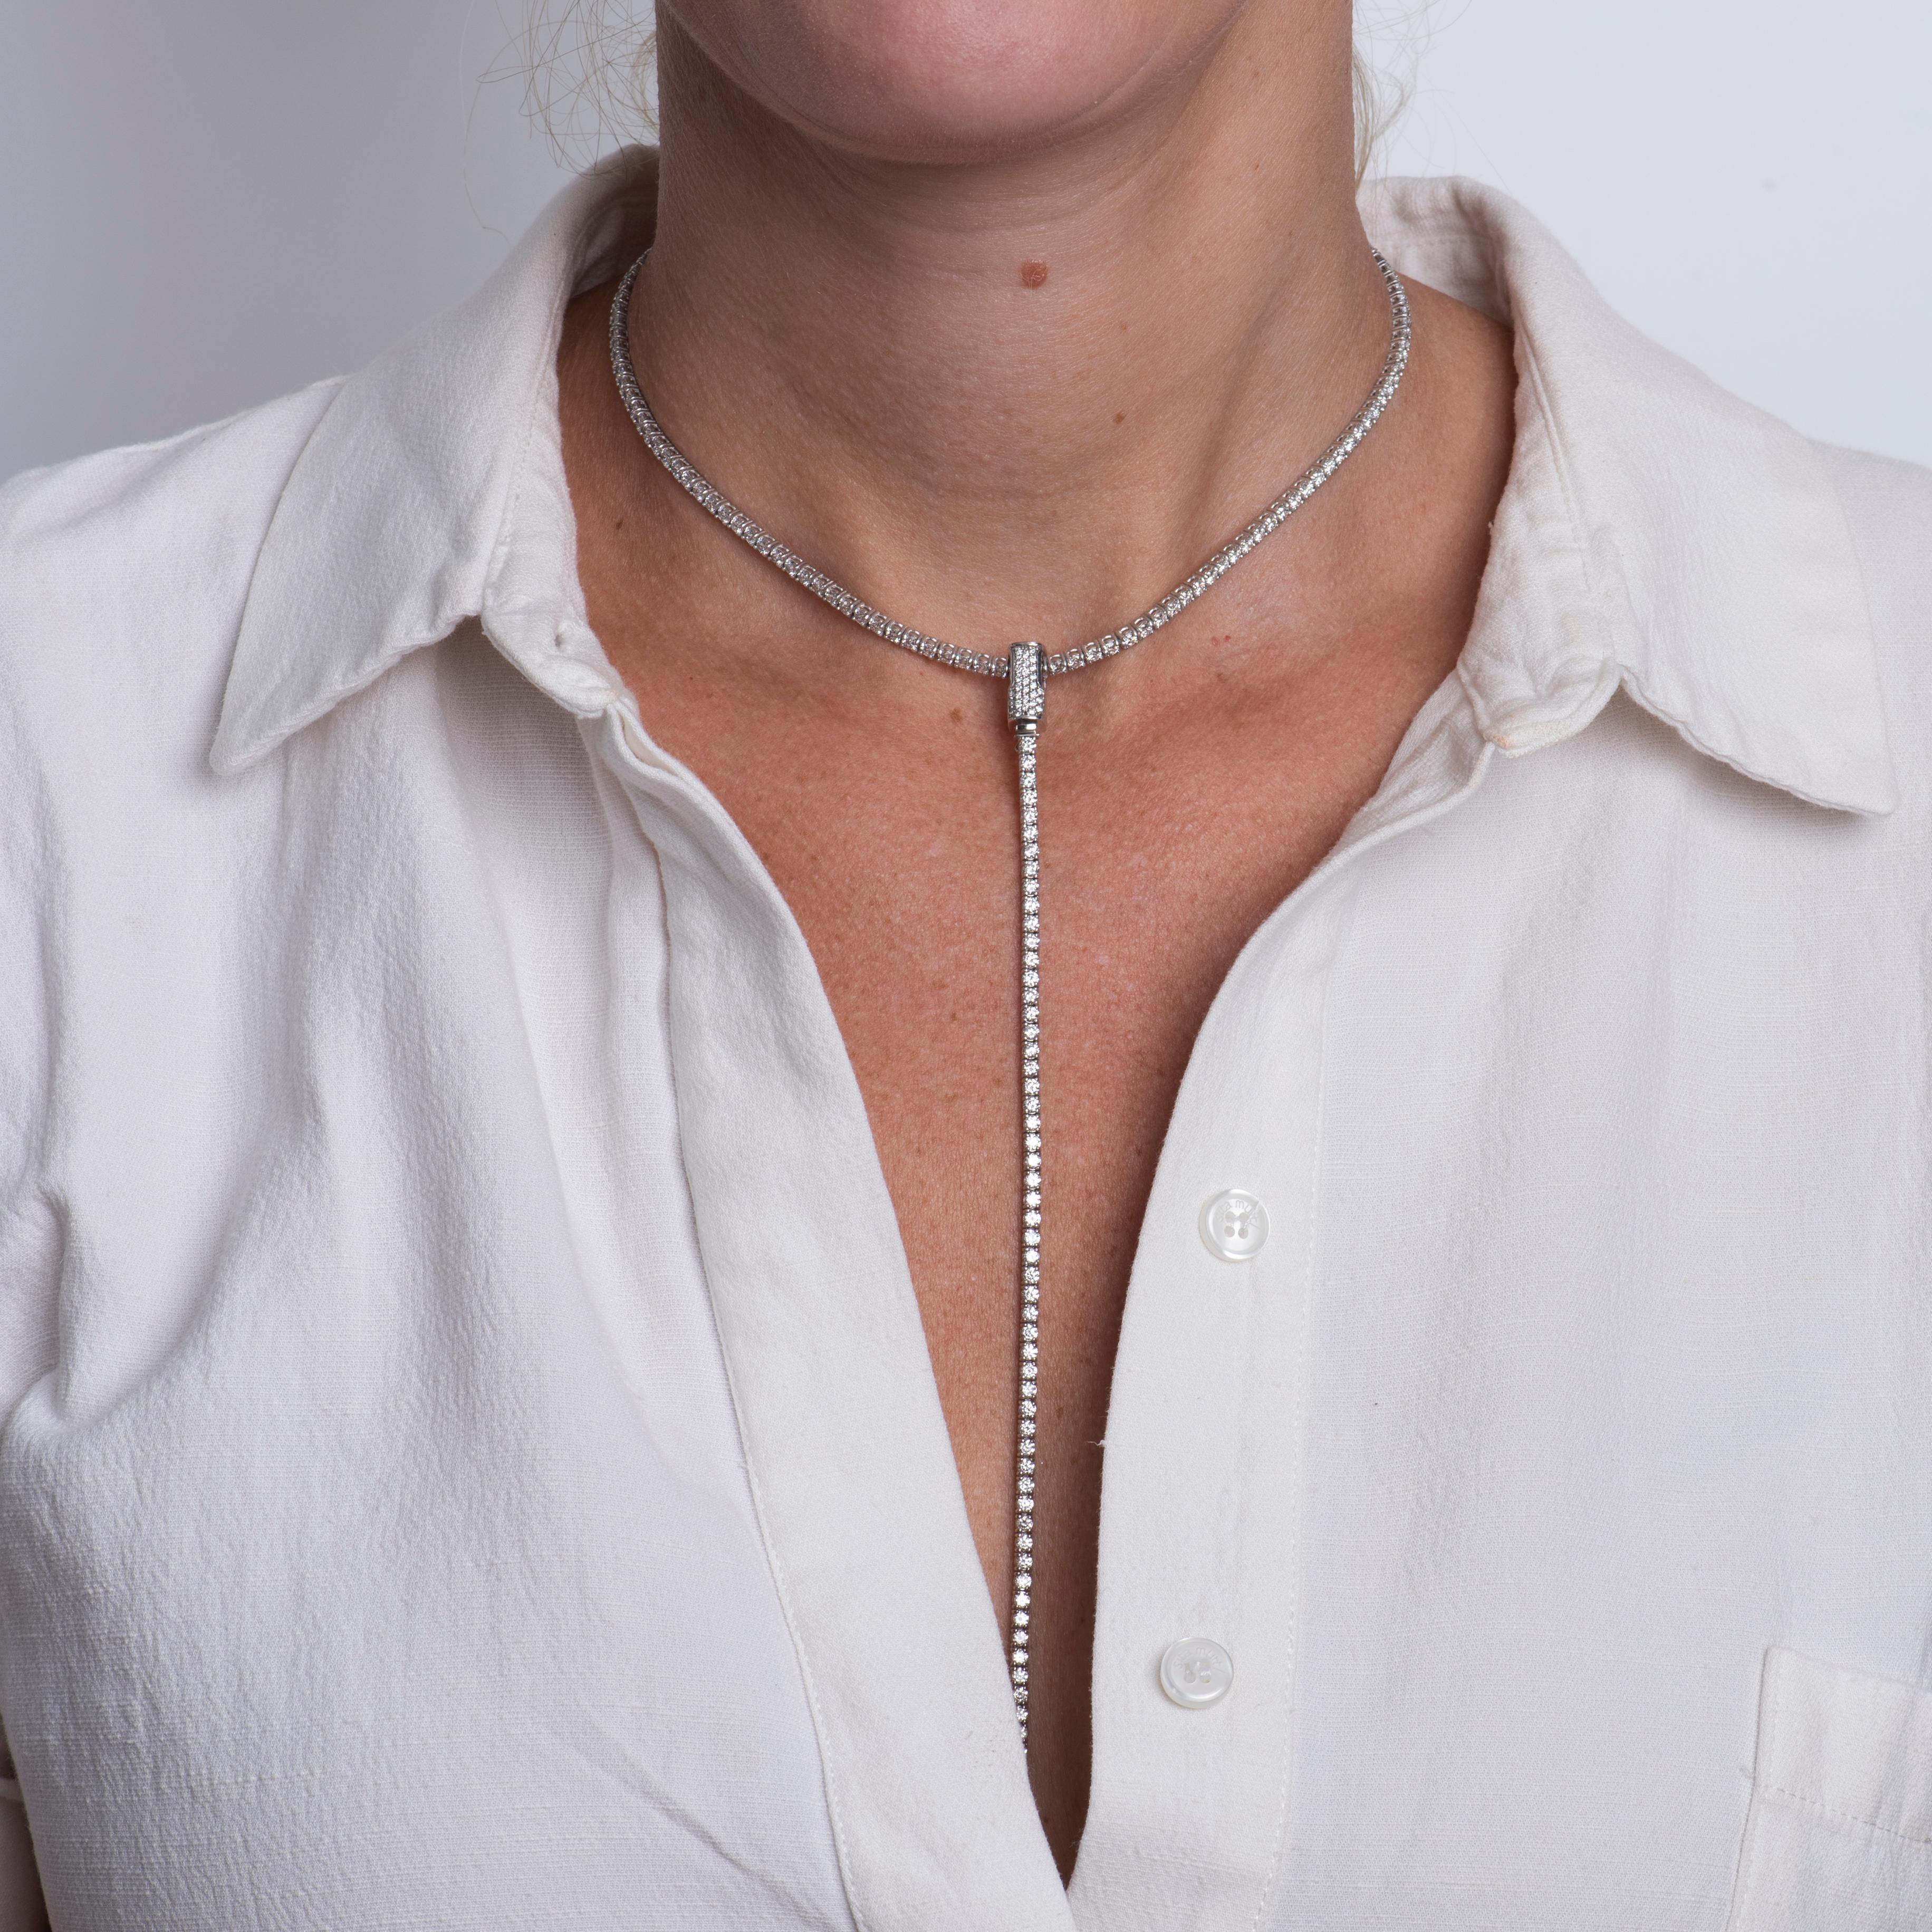 This unique design was crafted in house by our master jewelers and can be worn multiple ways. It features 7.40 carat total weight in natural round diamonds set in 14 karat white gold. The 11 inch tennis necklace is adjustable up to 16